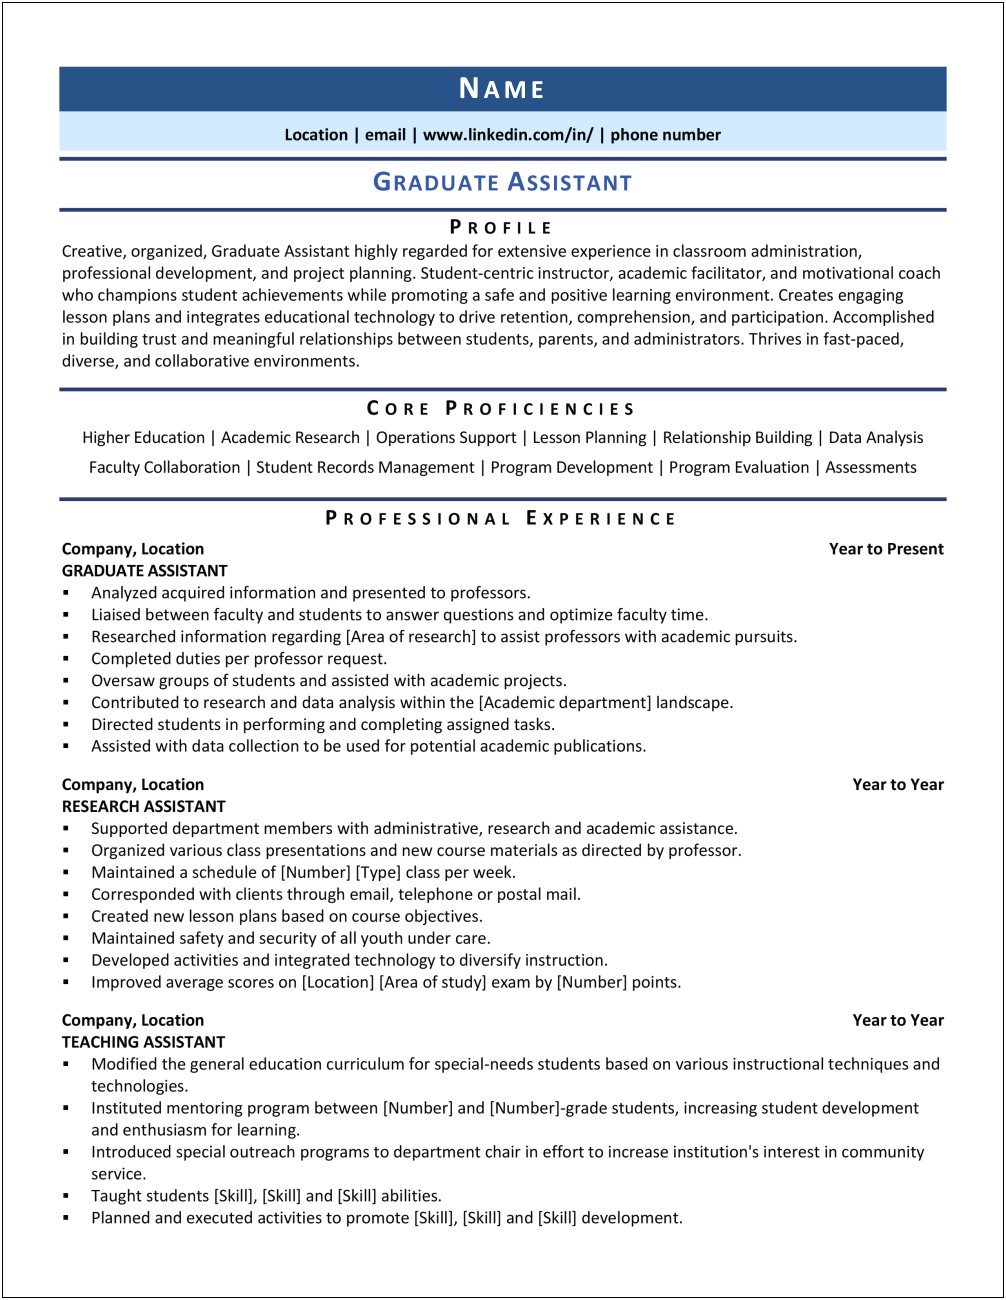 Student Teaching Placement Resume Objective